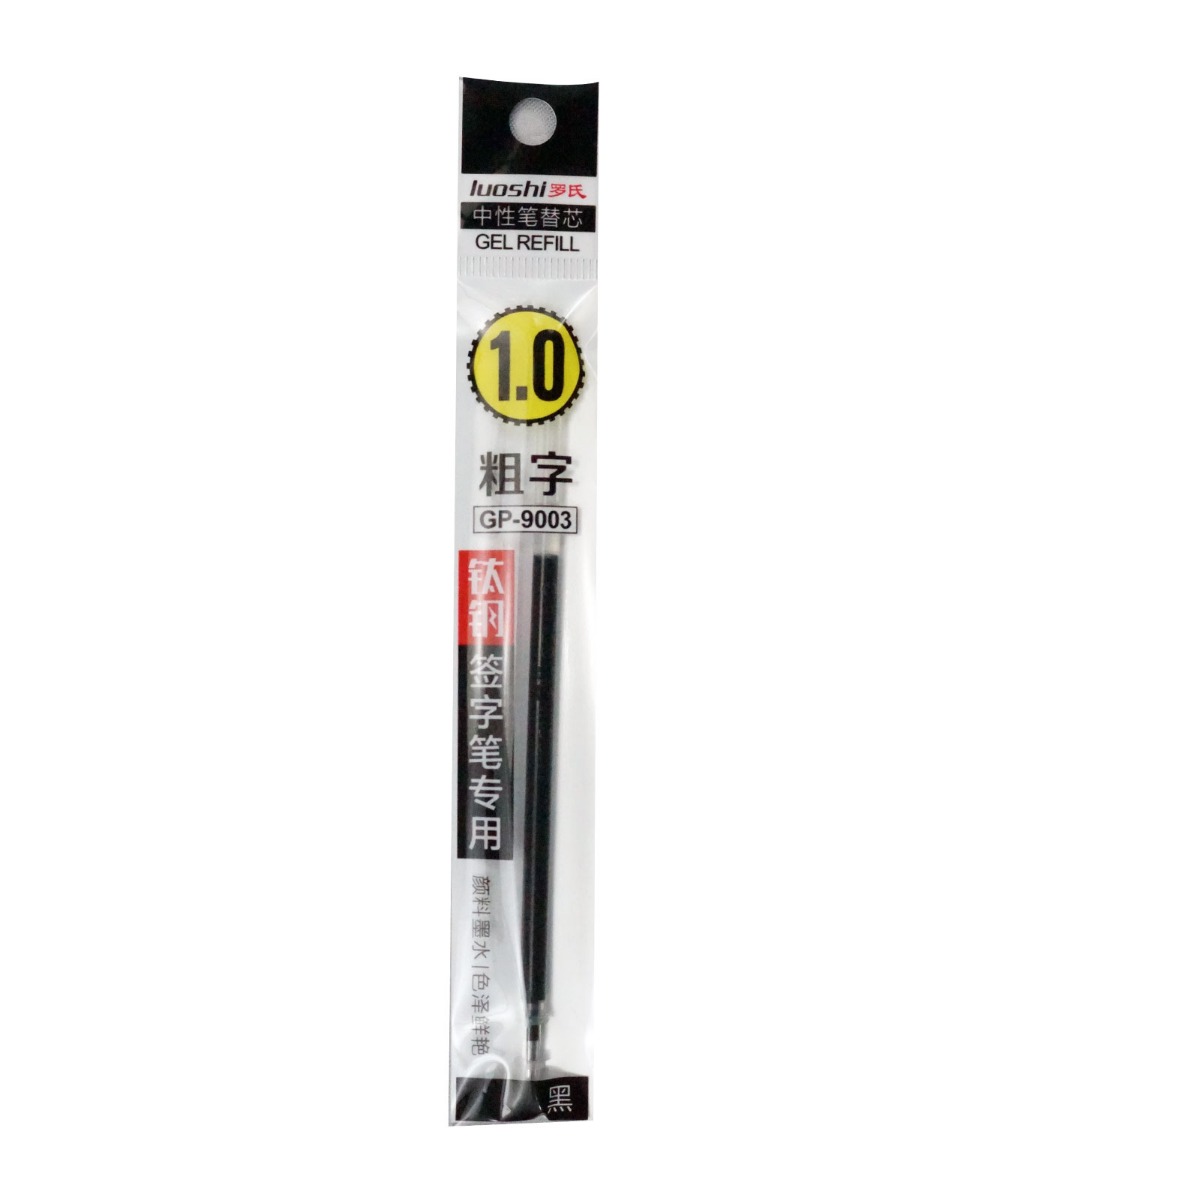 Luoshi 1.0 Model: 71539 Black Color Writing Refill 1.0 mm